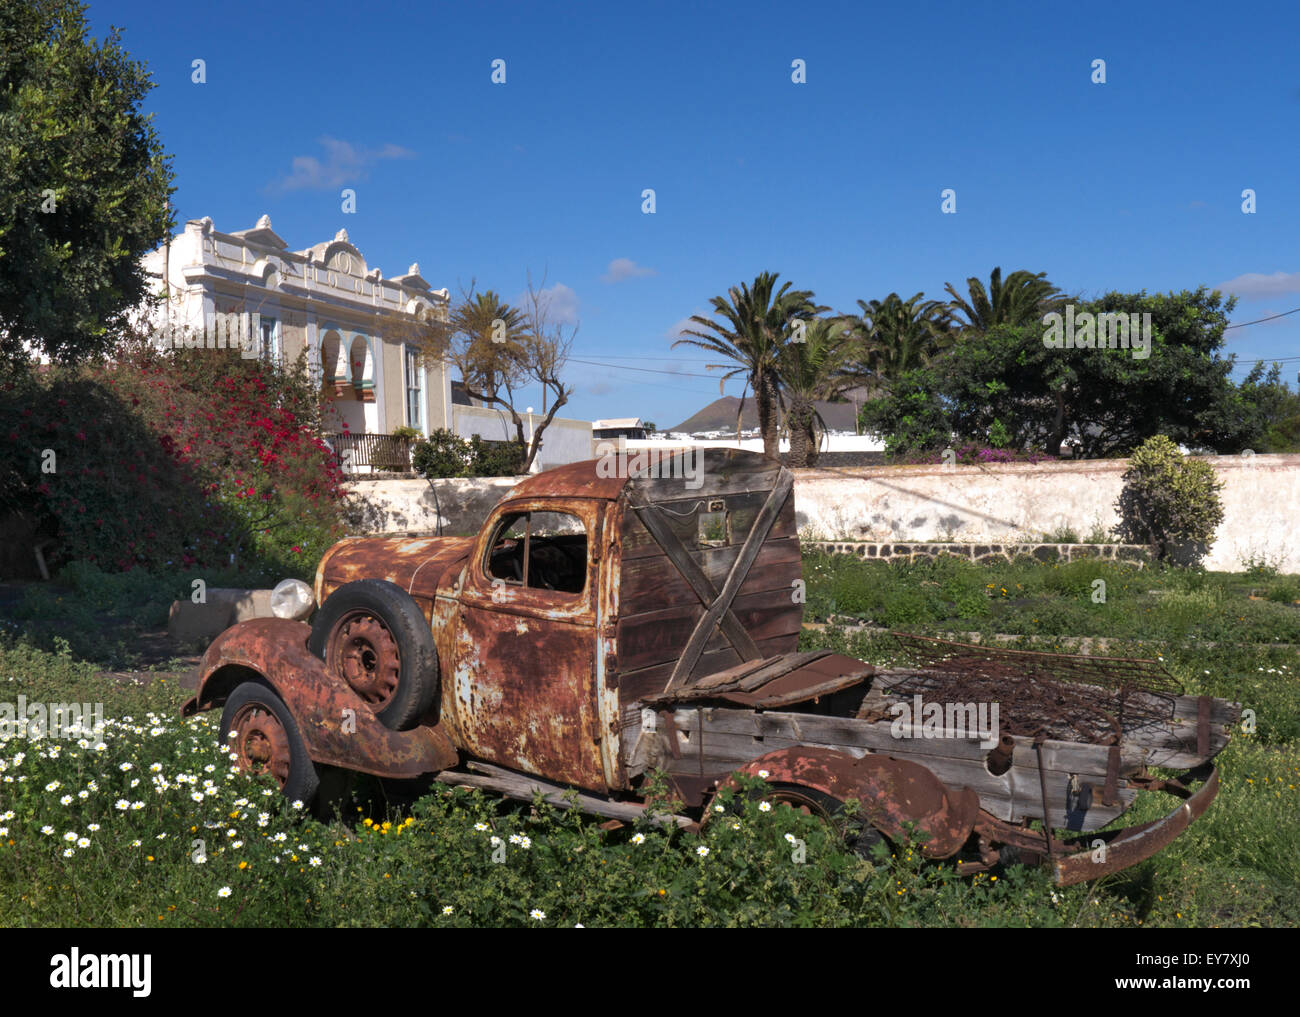 Rusting old pick up truck forms an attractive feature in a Lanzarote garden with old finca farm behind Canary Islands Spain Stock Photo